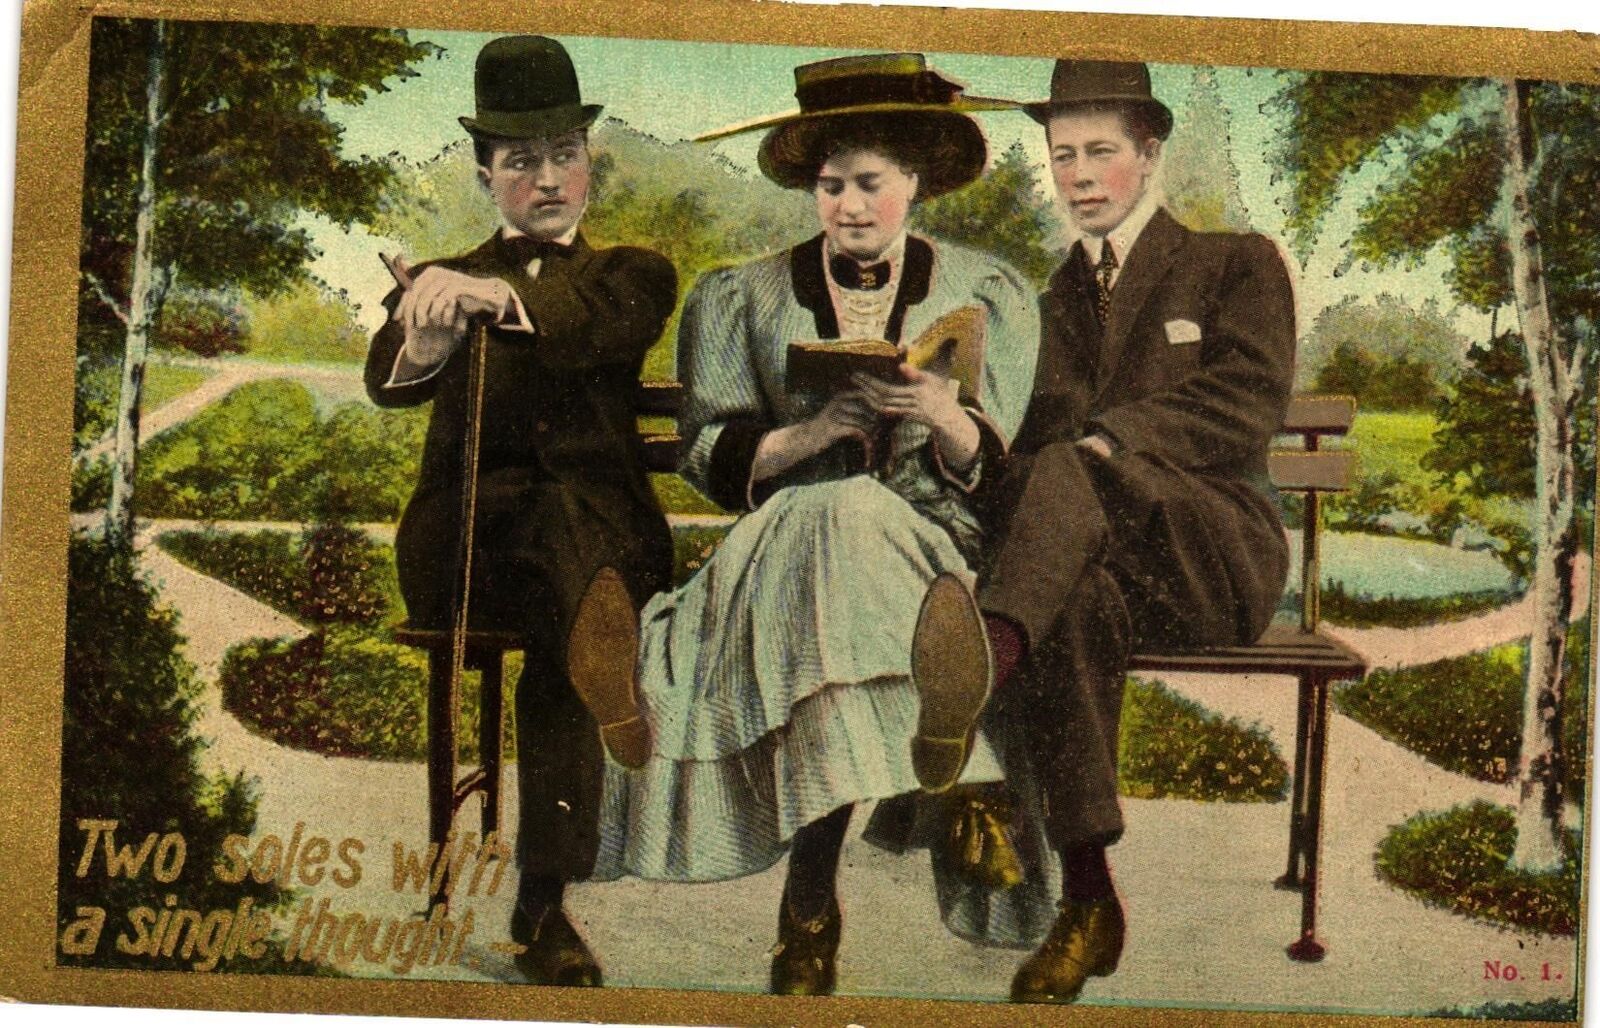 Vintage Postcard- Life, Two sales with a single thought Posted 1910